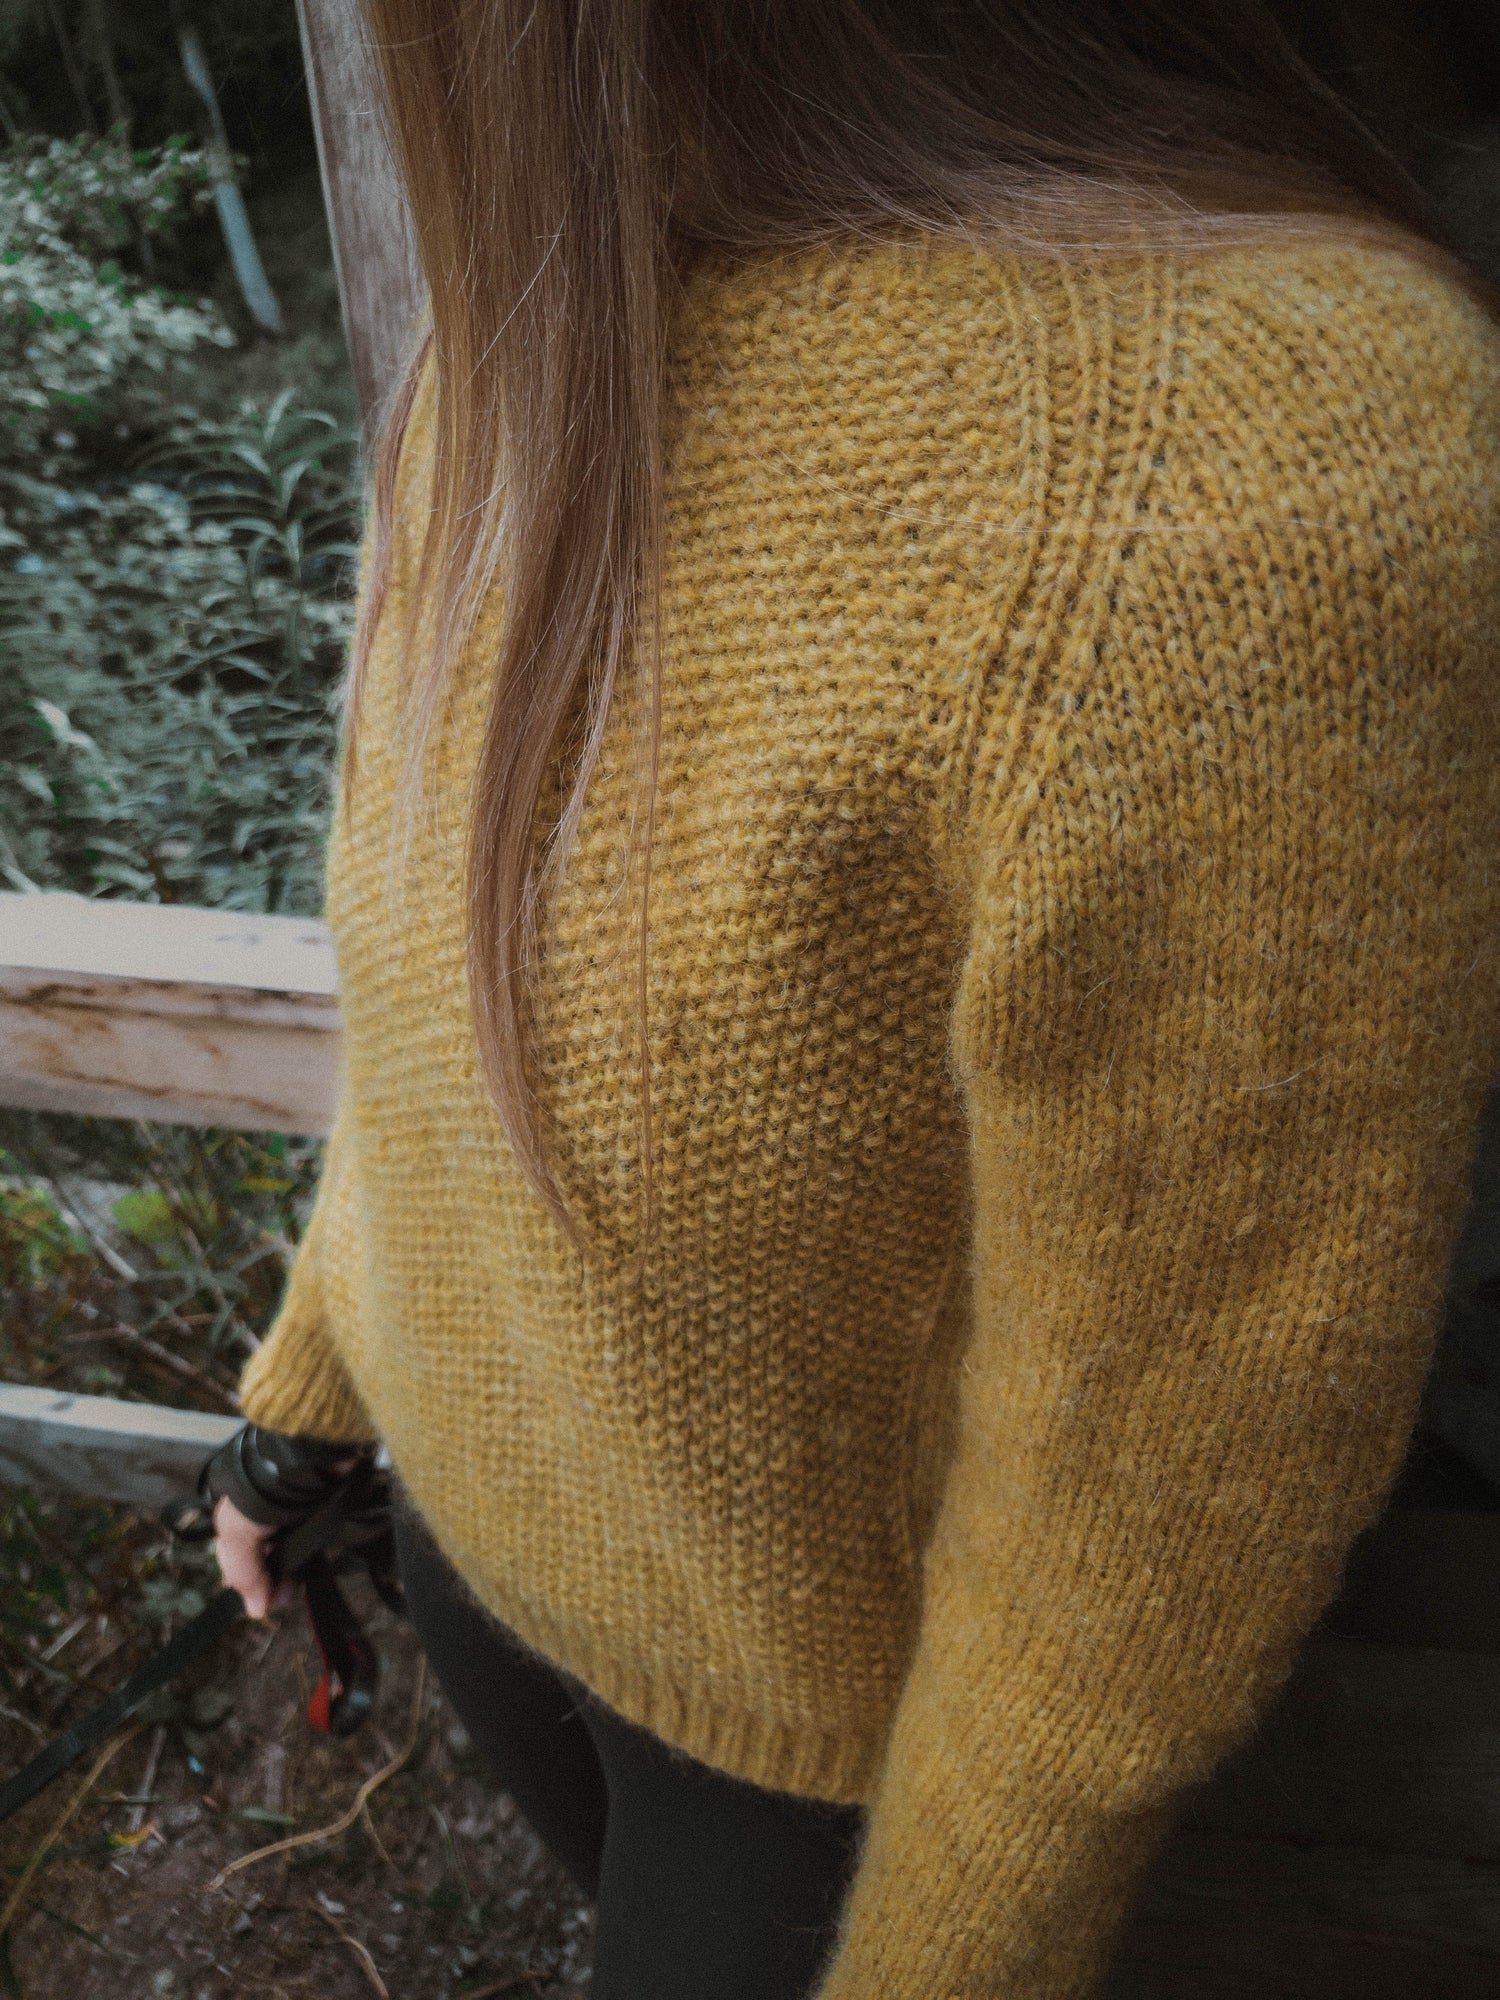 Close-up of the ribbed raglan seam and textured seed stitch on the 'Before Fall Sweater' by Ulven, presented in amber-yellow. The garment, worn by the designer, is set against a soft-focus background of green foliage crafted with unspun Nutiden yarn.